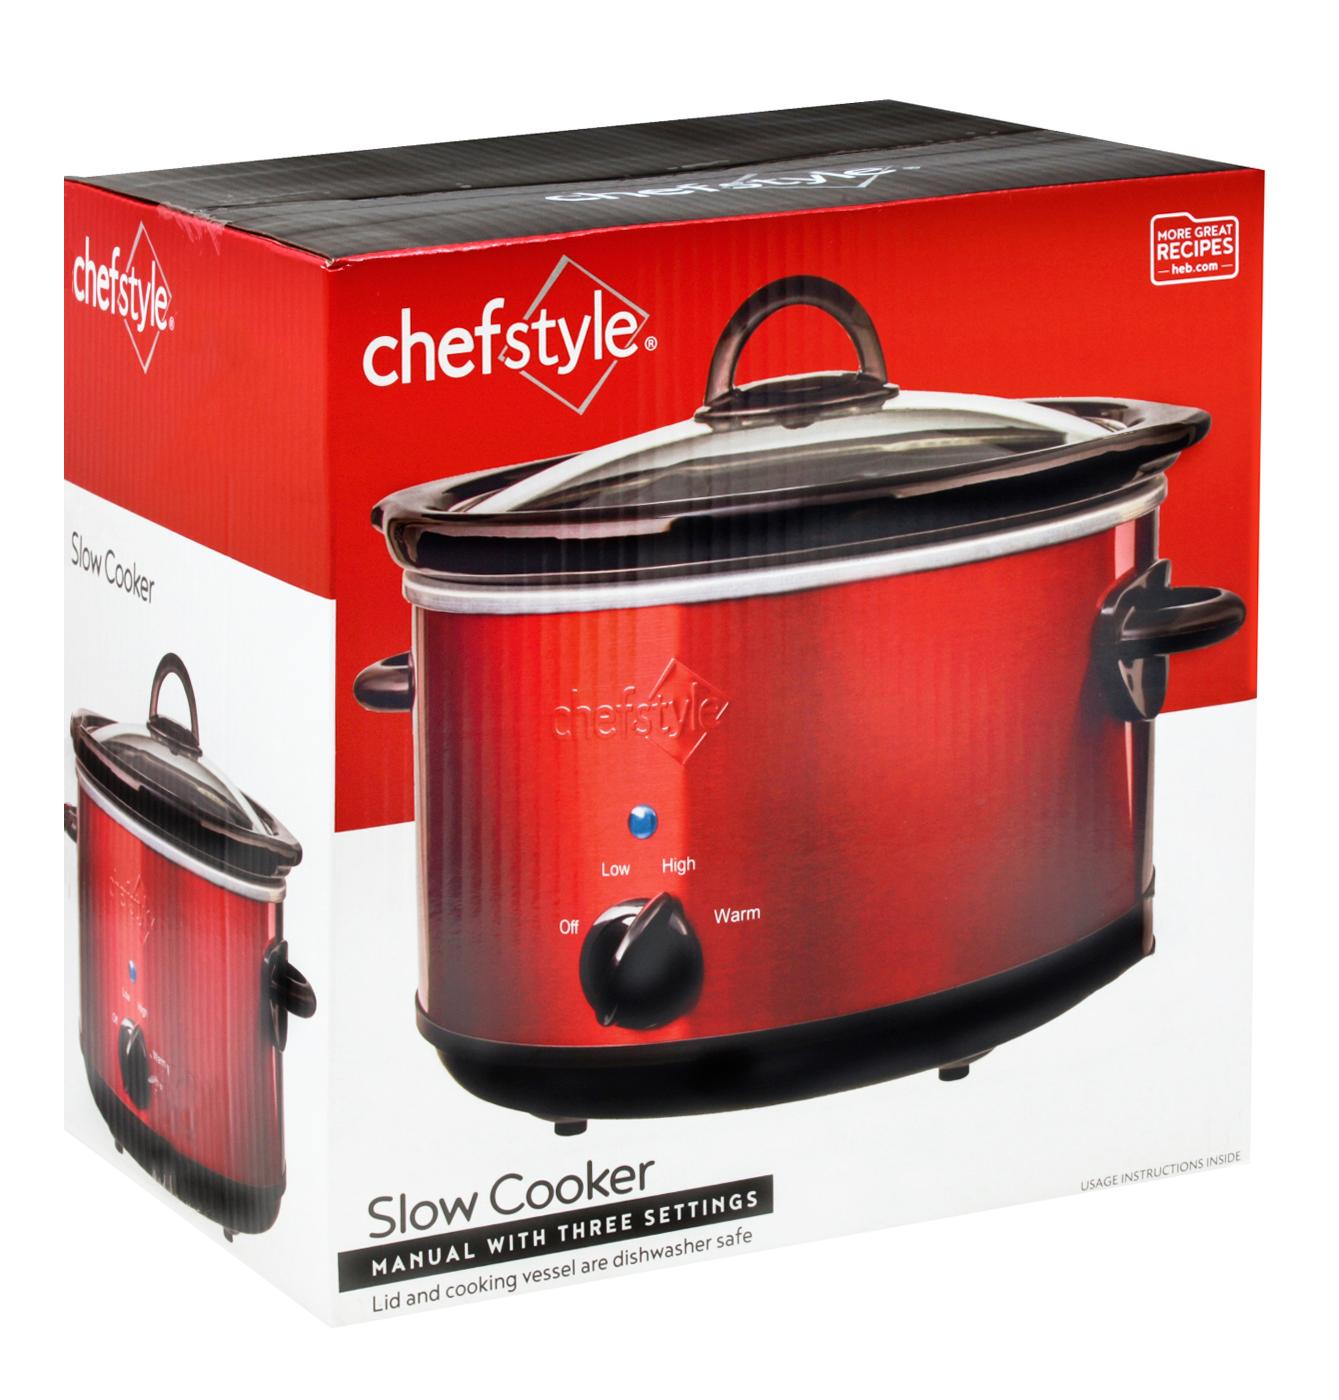 chefstyle Manual Slow Cooker - Red; image 2 of 2